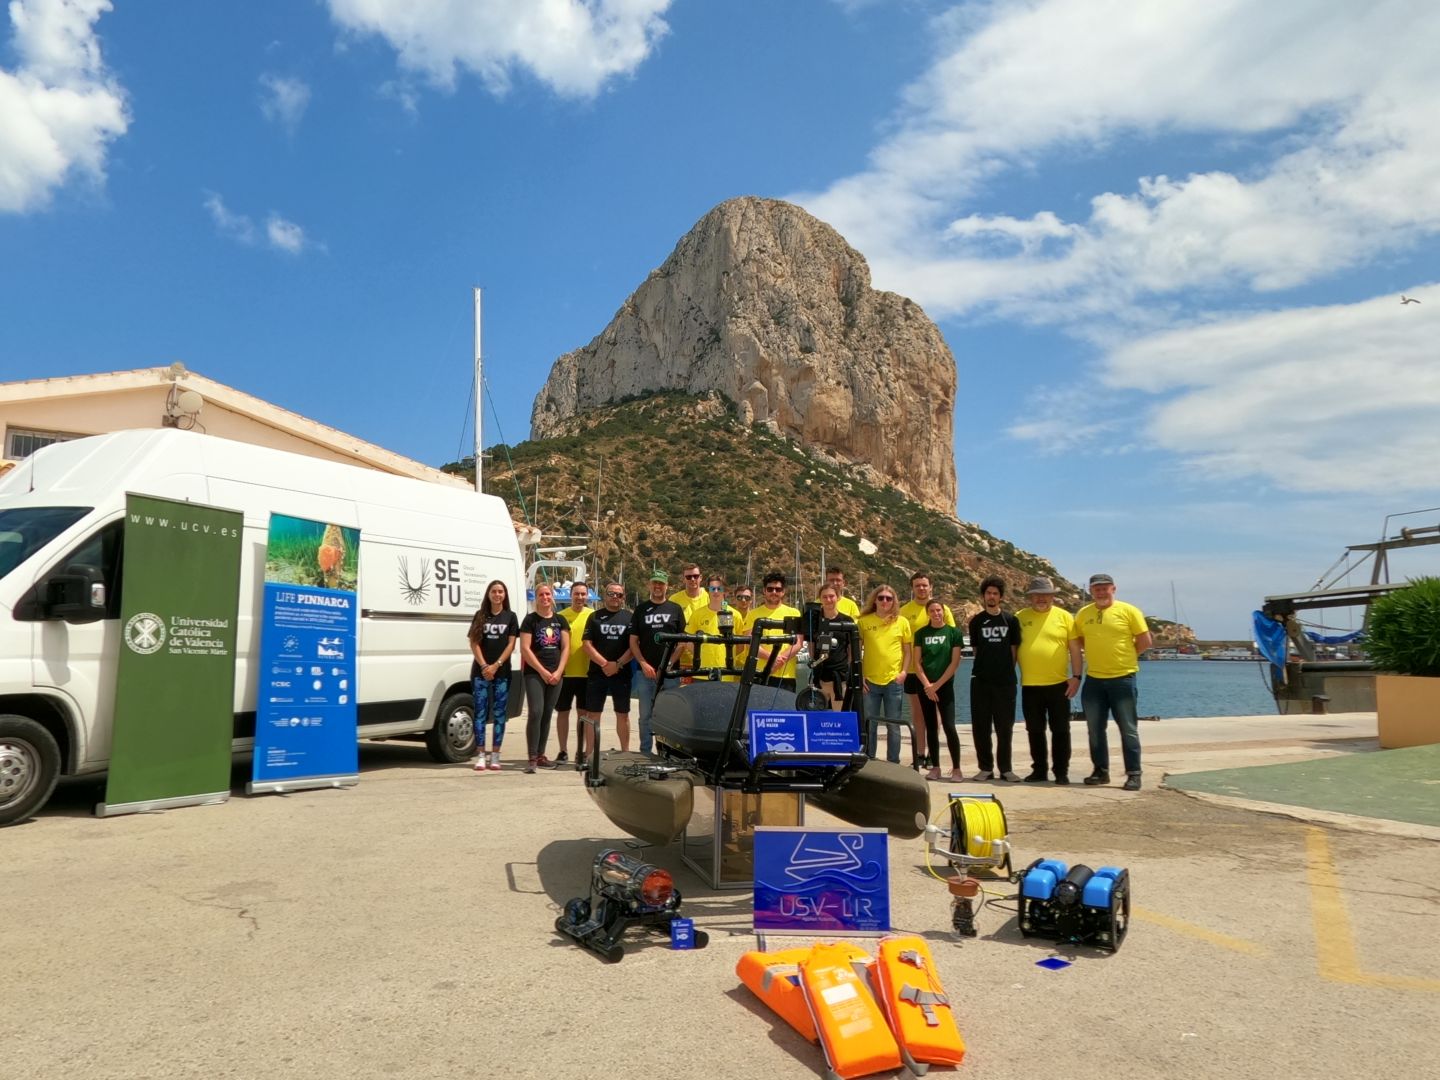 EU-CONEXUS SETU students join Spanish counterparts in sea-based test missions